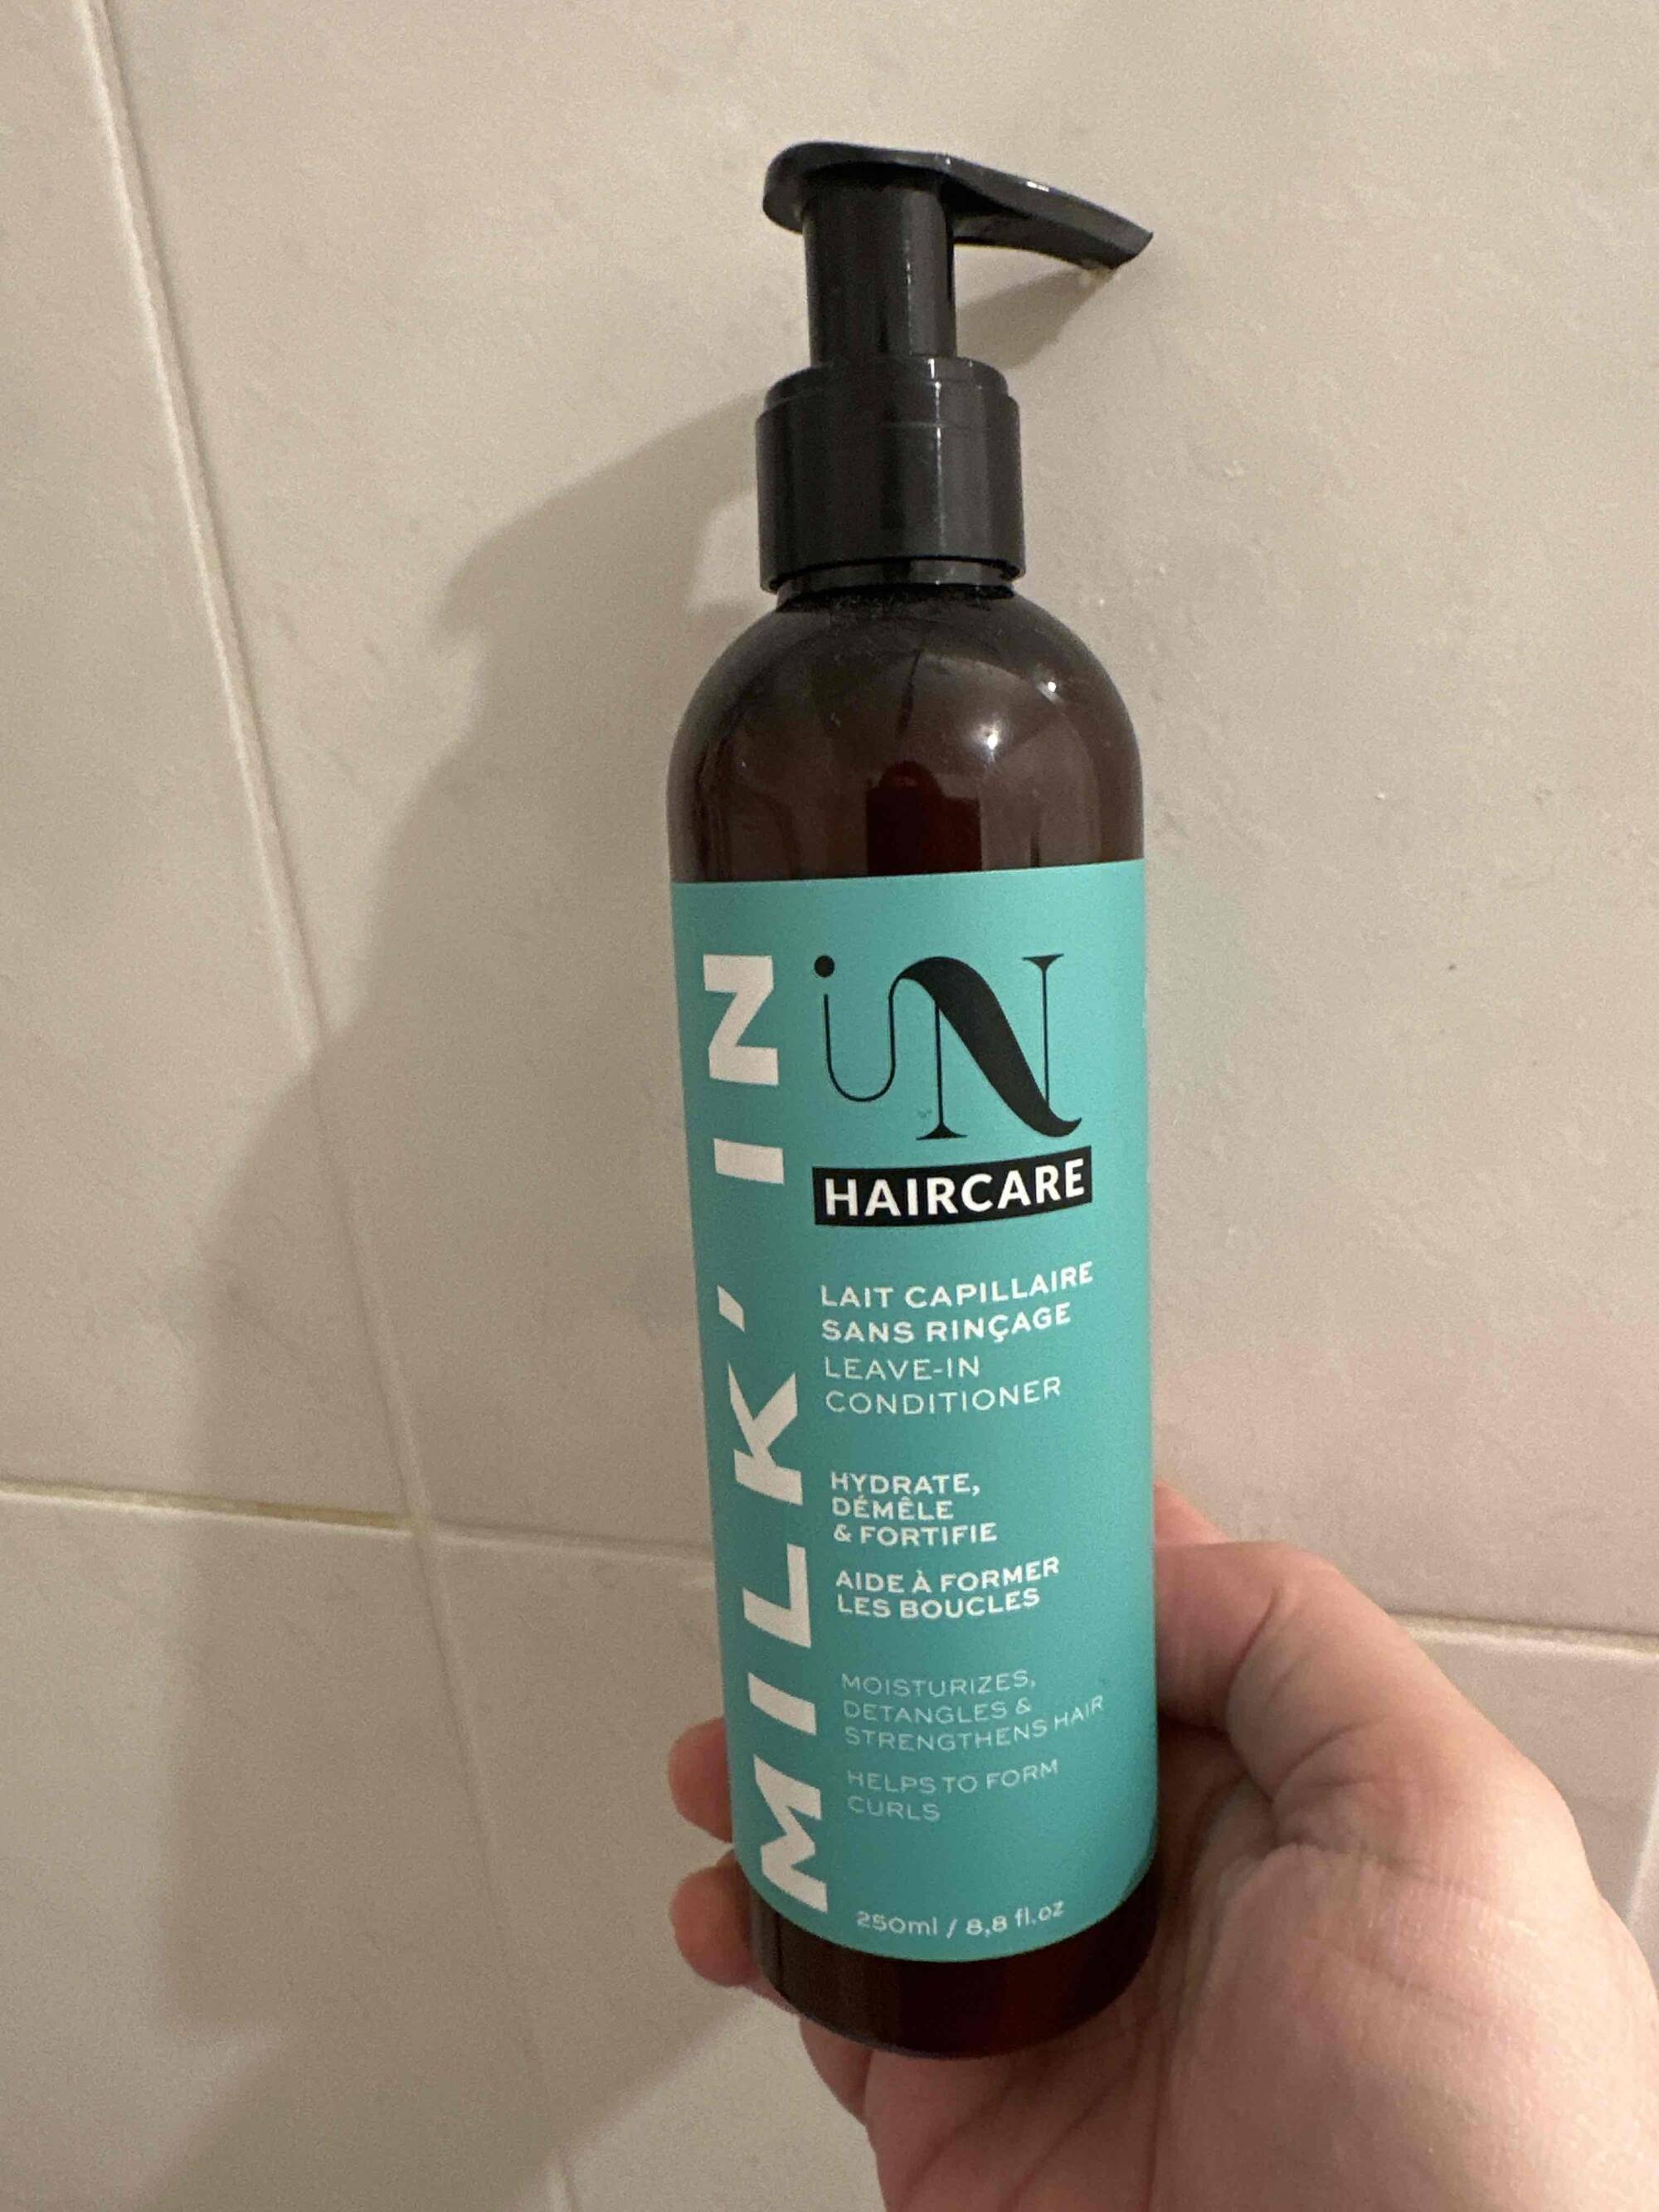 IN HAIRCARE - Milk’in - Lait capillaire sans rinçage 